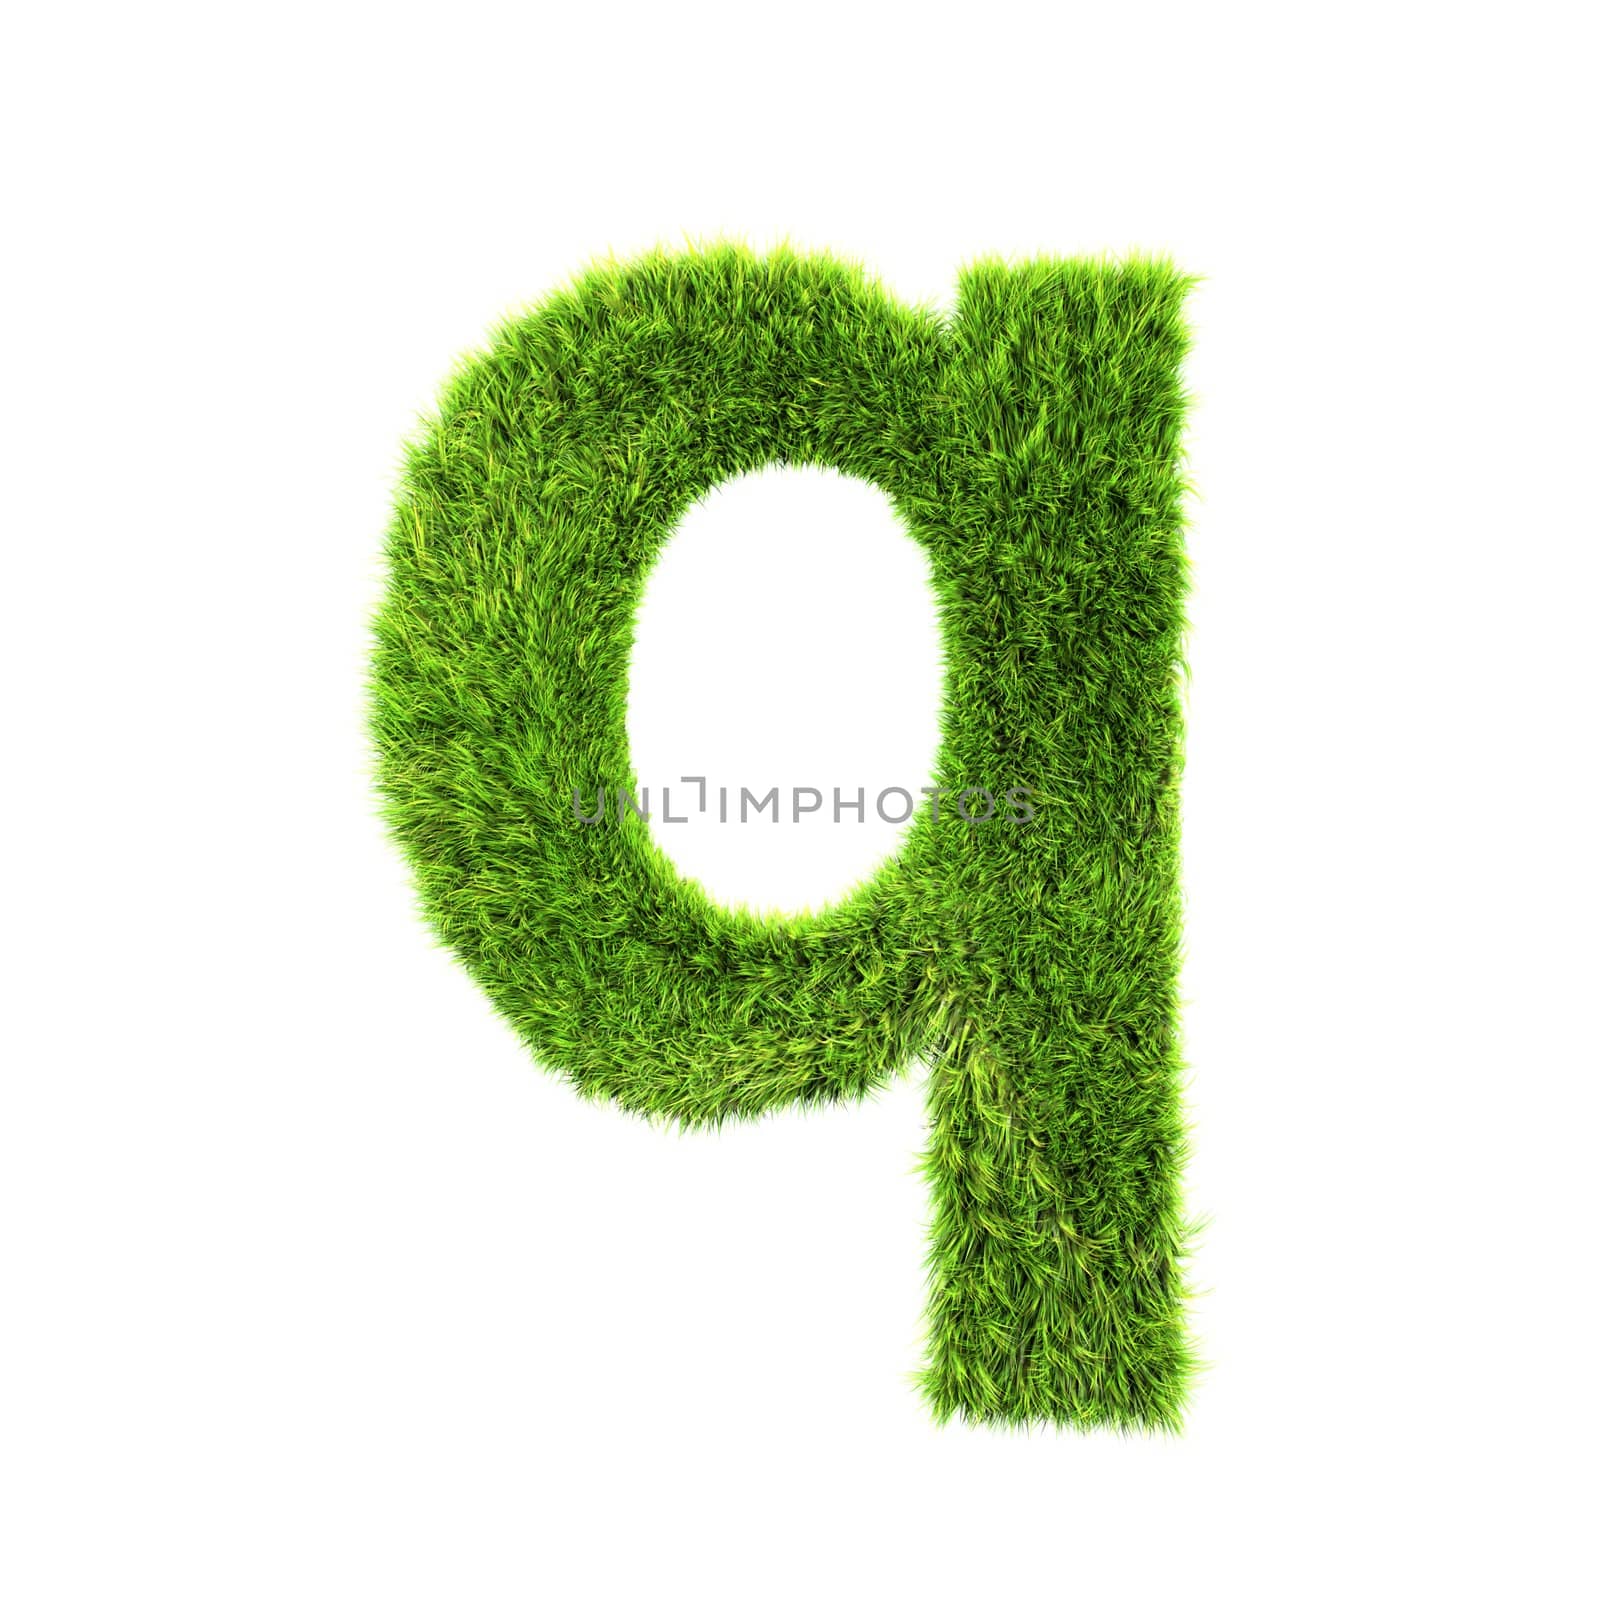 3d grass letter isolated on white background - q